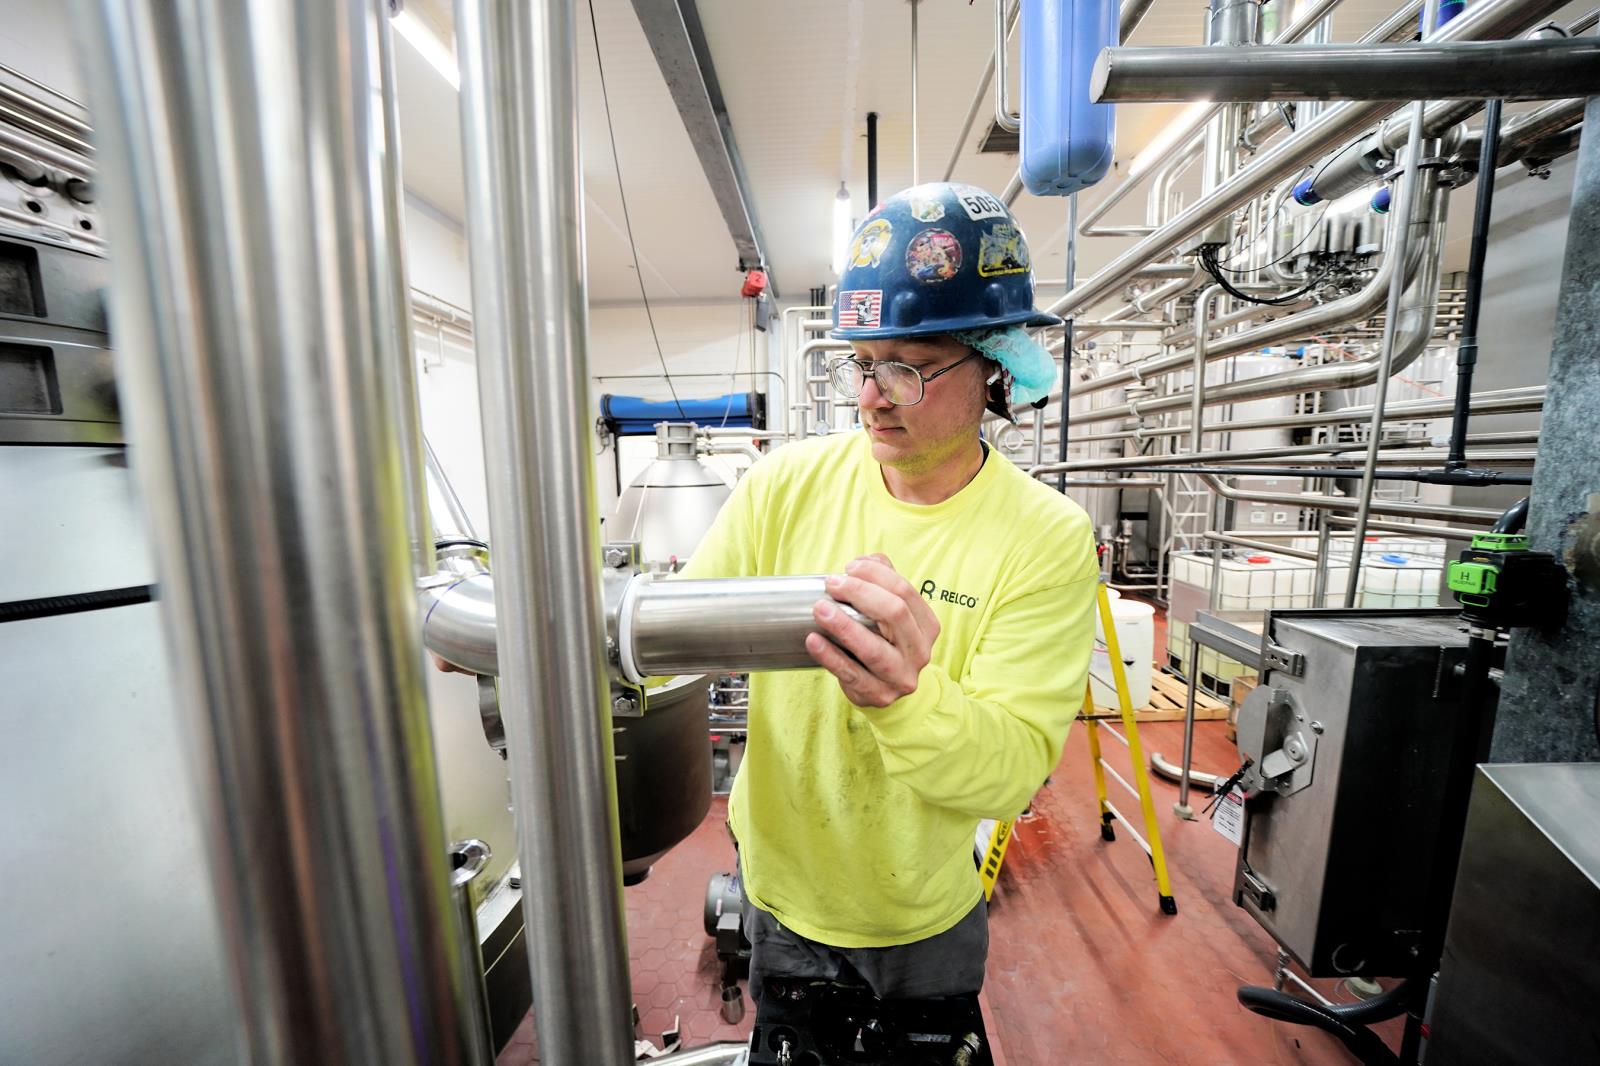 A contract construction worker installs piping for High Desert Milk’s new MPC-70 production line. The Burley-based cooperative, one of Idaho’s leading dairy processors, is undergoing a $50 million expansion at its Burley facility.